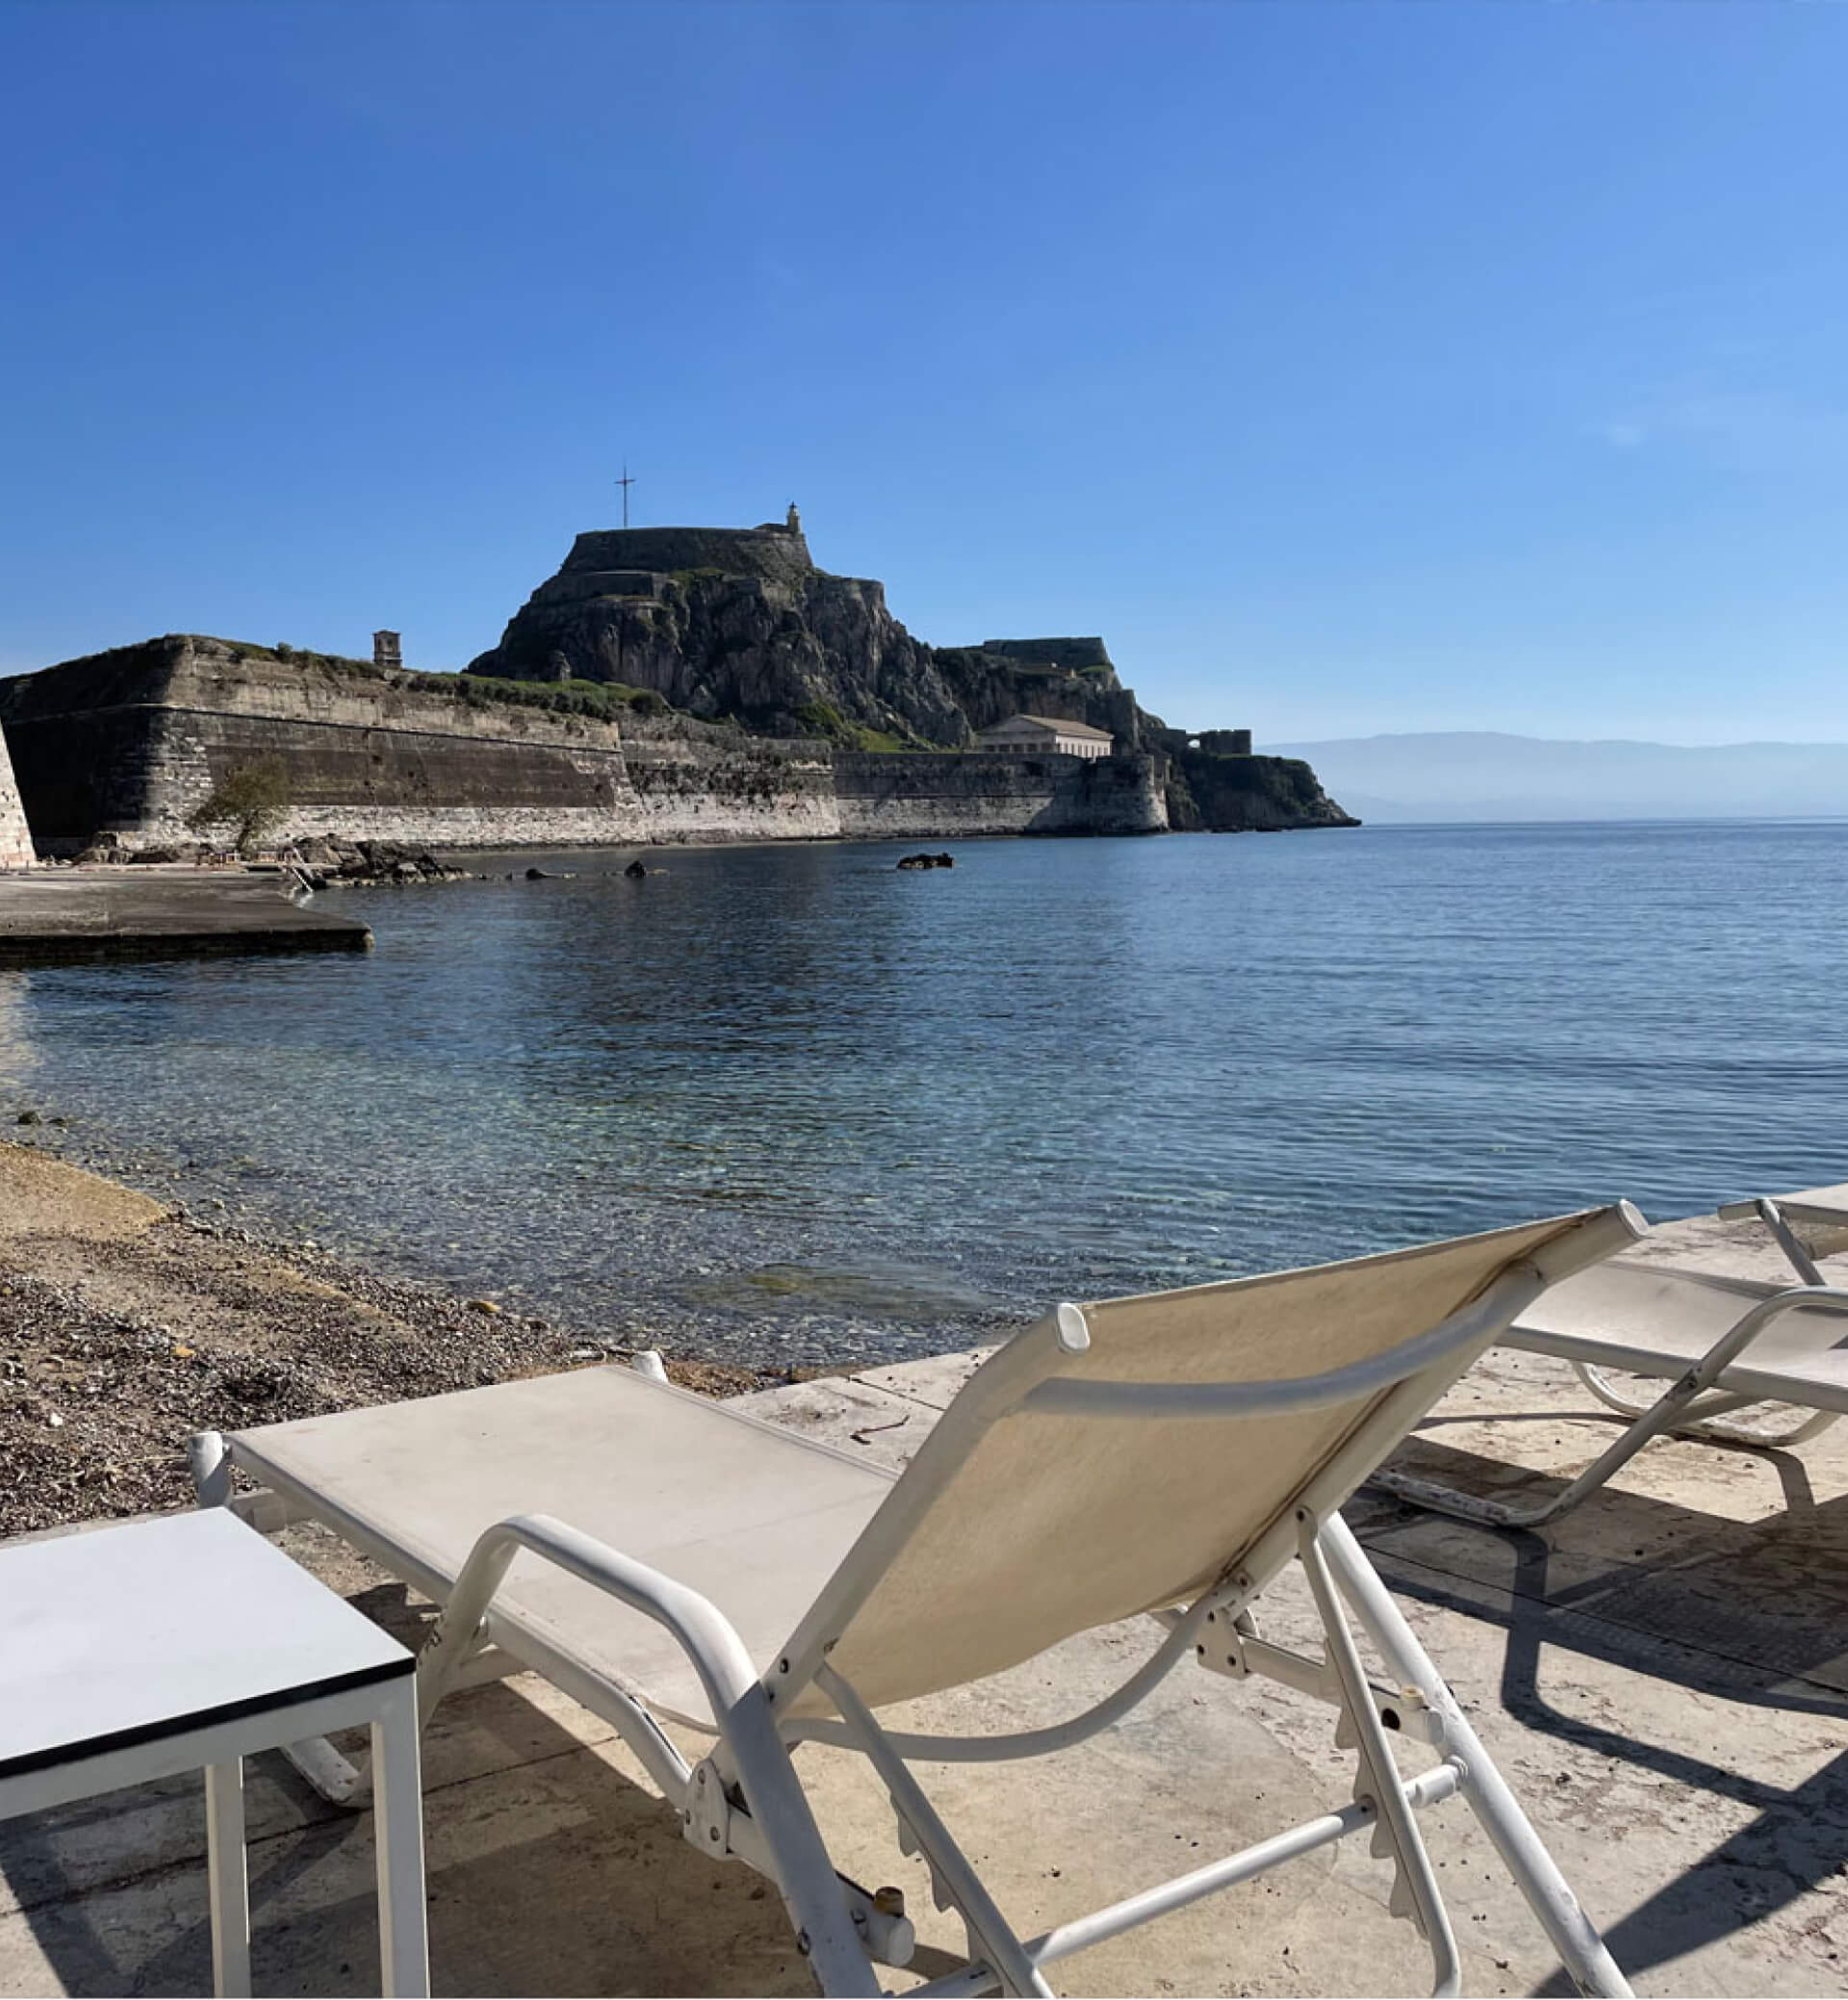 Picturesque beach in front of Azur, with sunbeds and the enchanting old fortress in the background